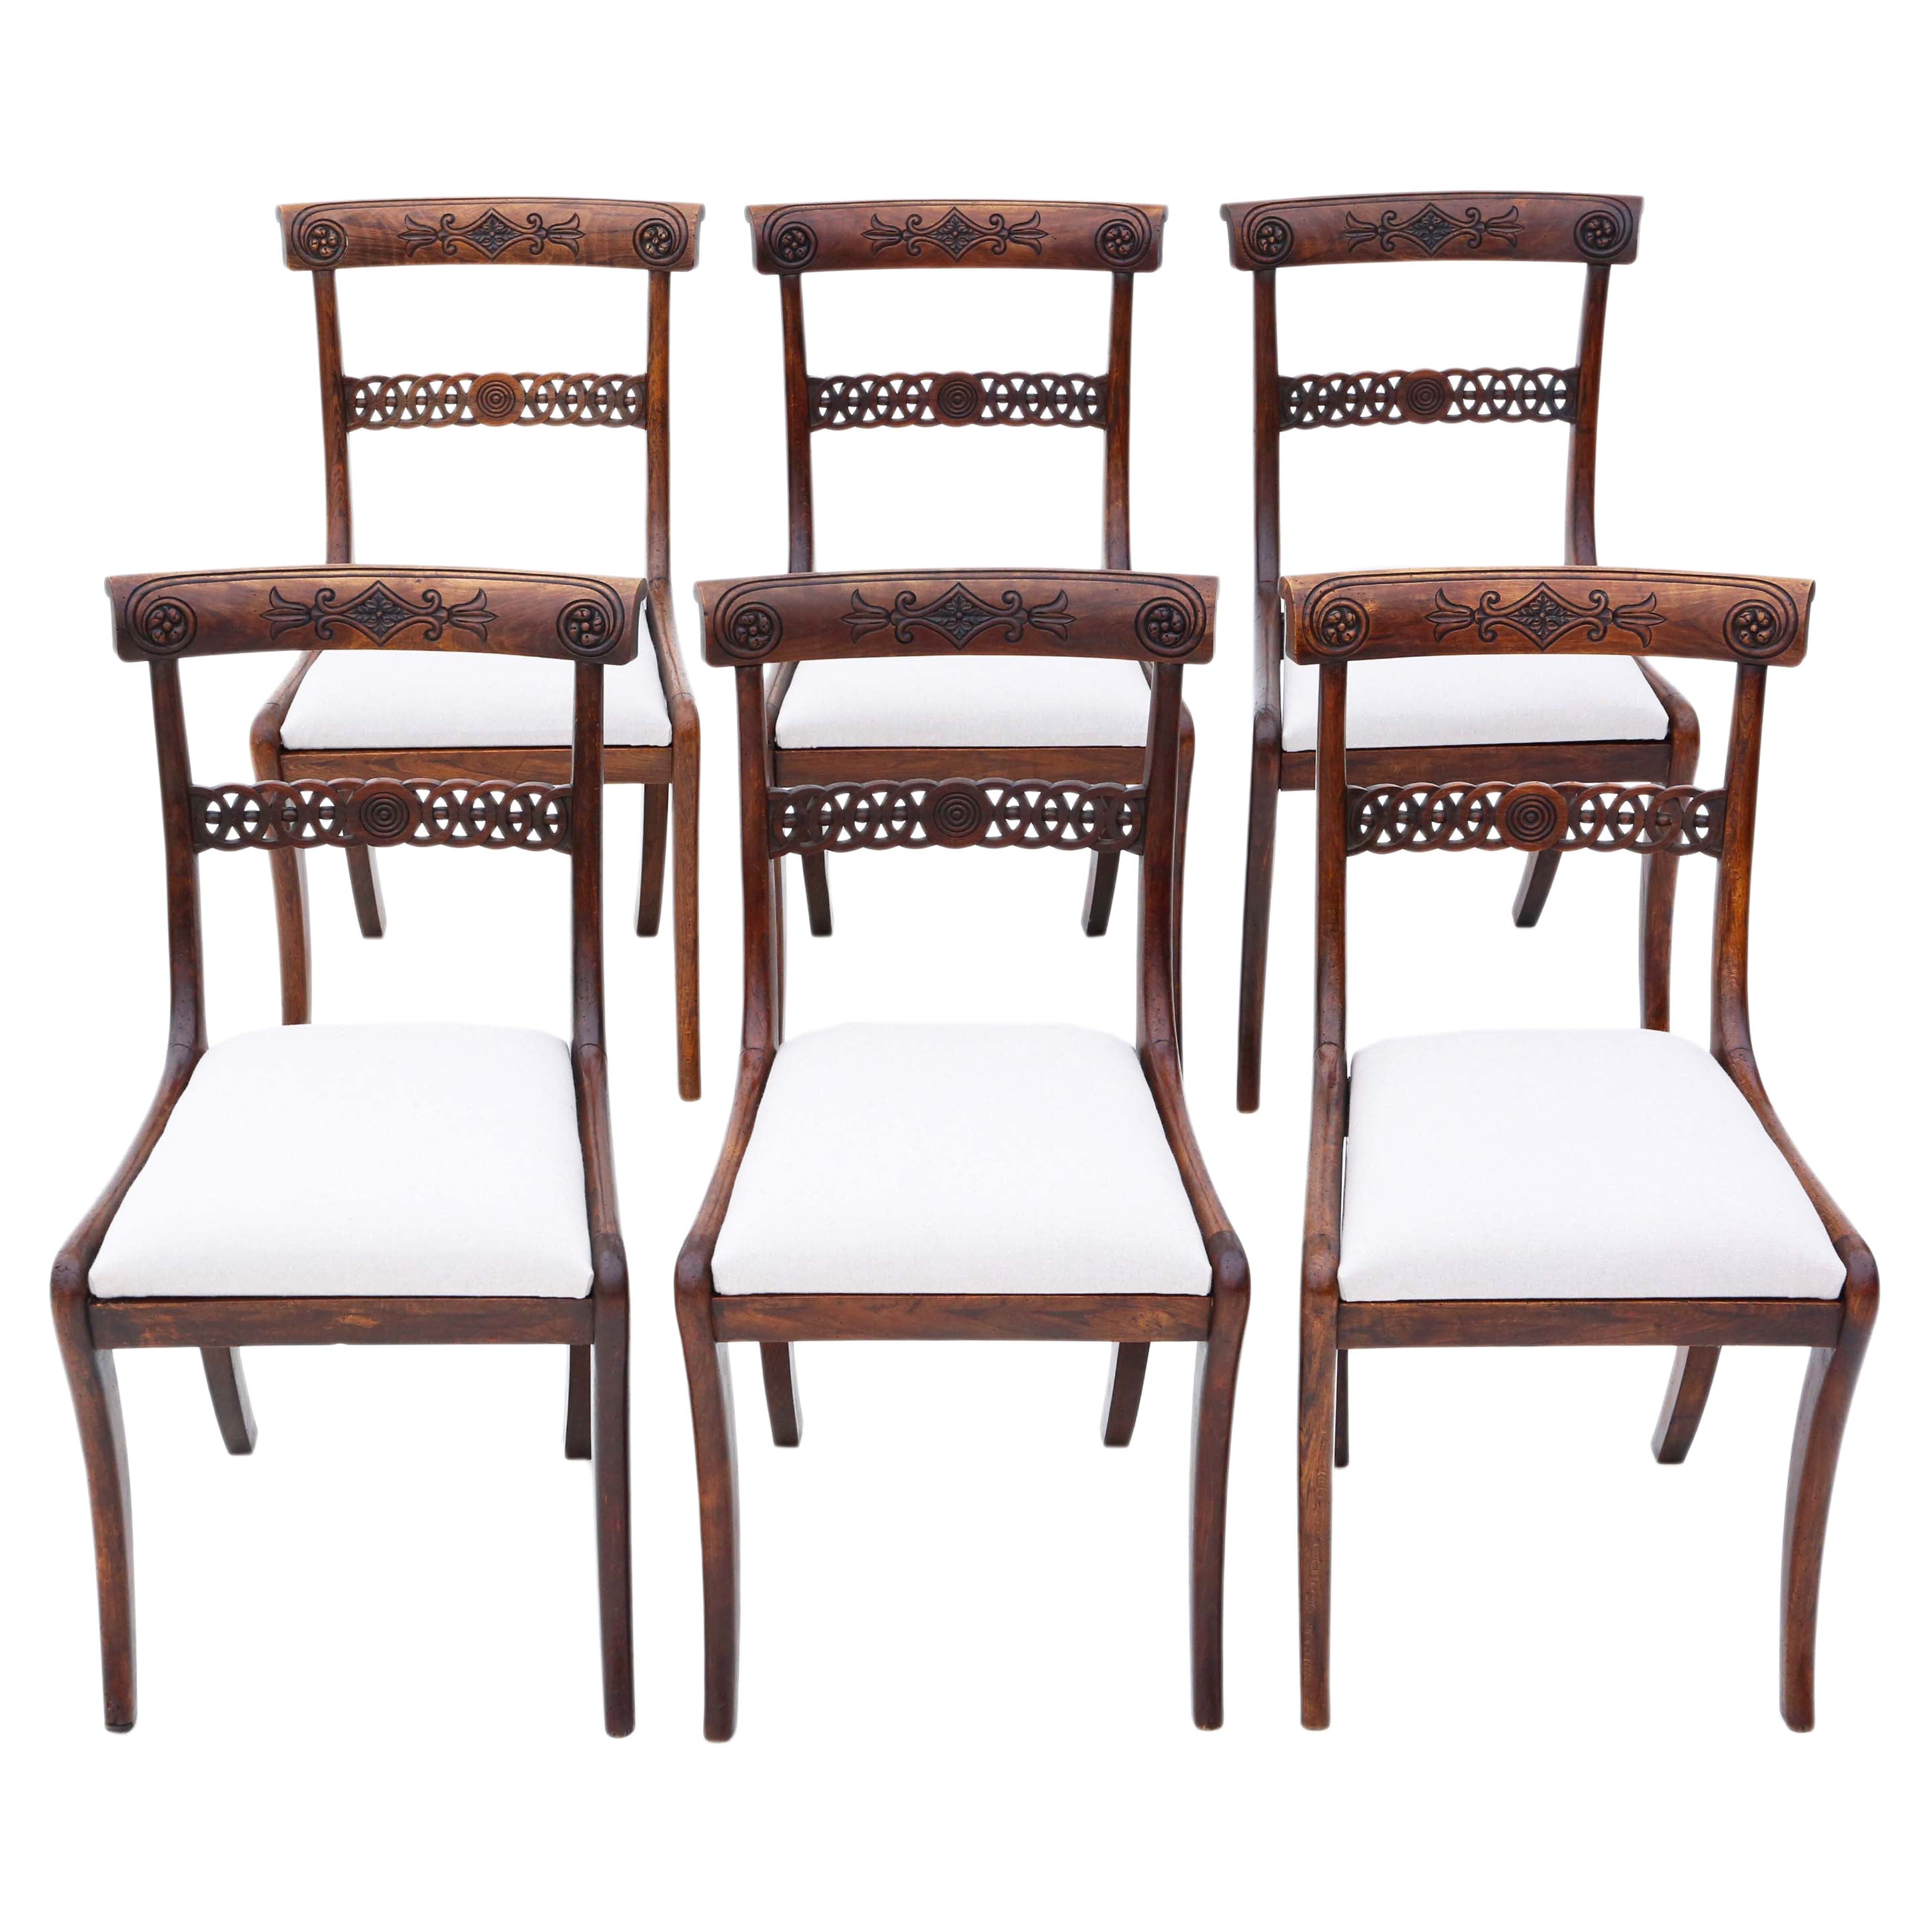 Antique Set of 6 Regency Faux Rosewood Beech Dining Chairs 19th Century